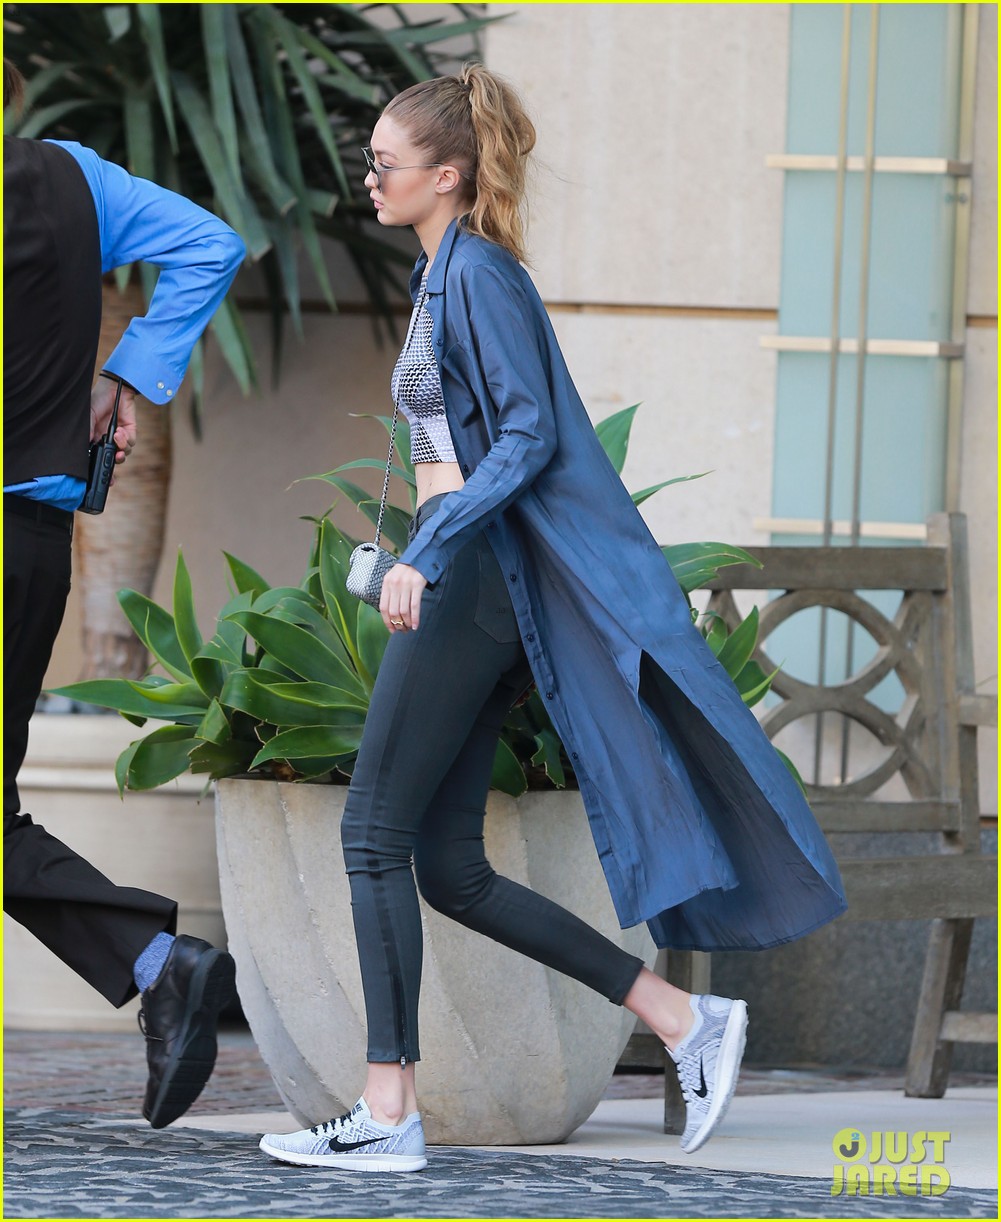 kendall jenner gigi hadid out sunny west hollywood 50